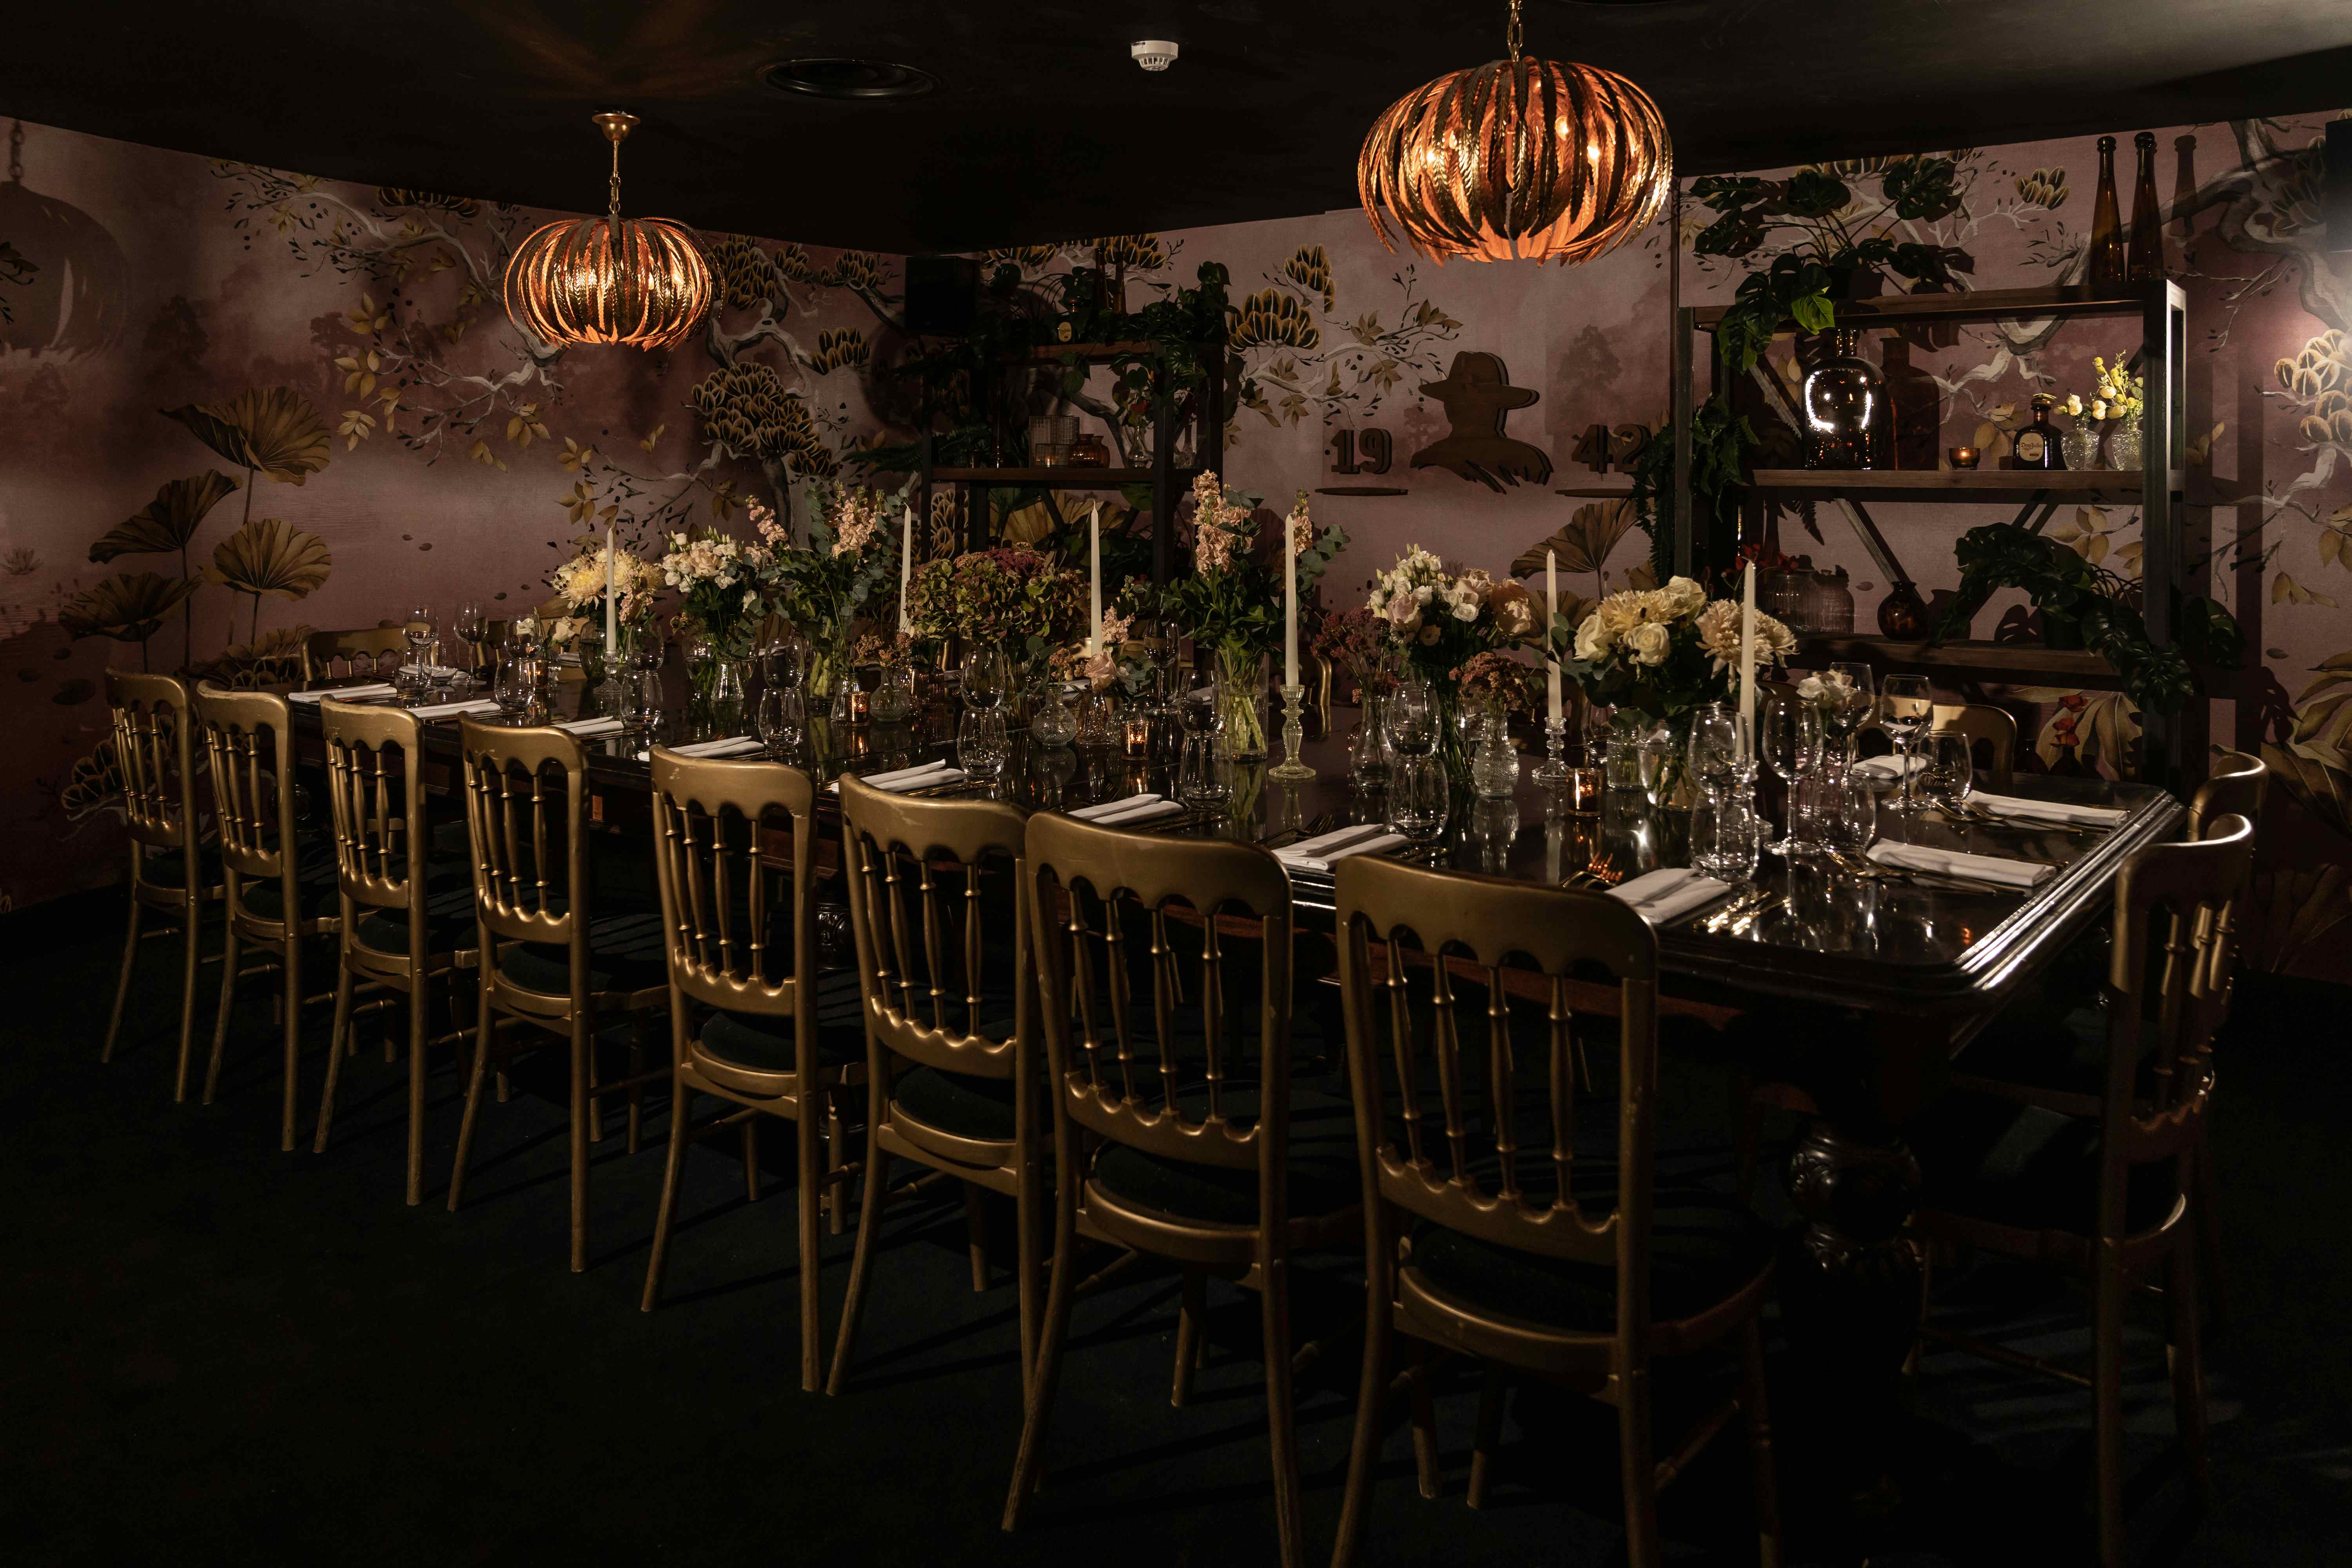 The Bloom Room, Restaurant Ours